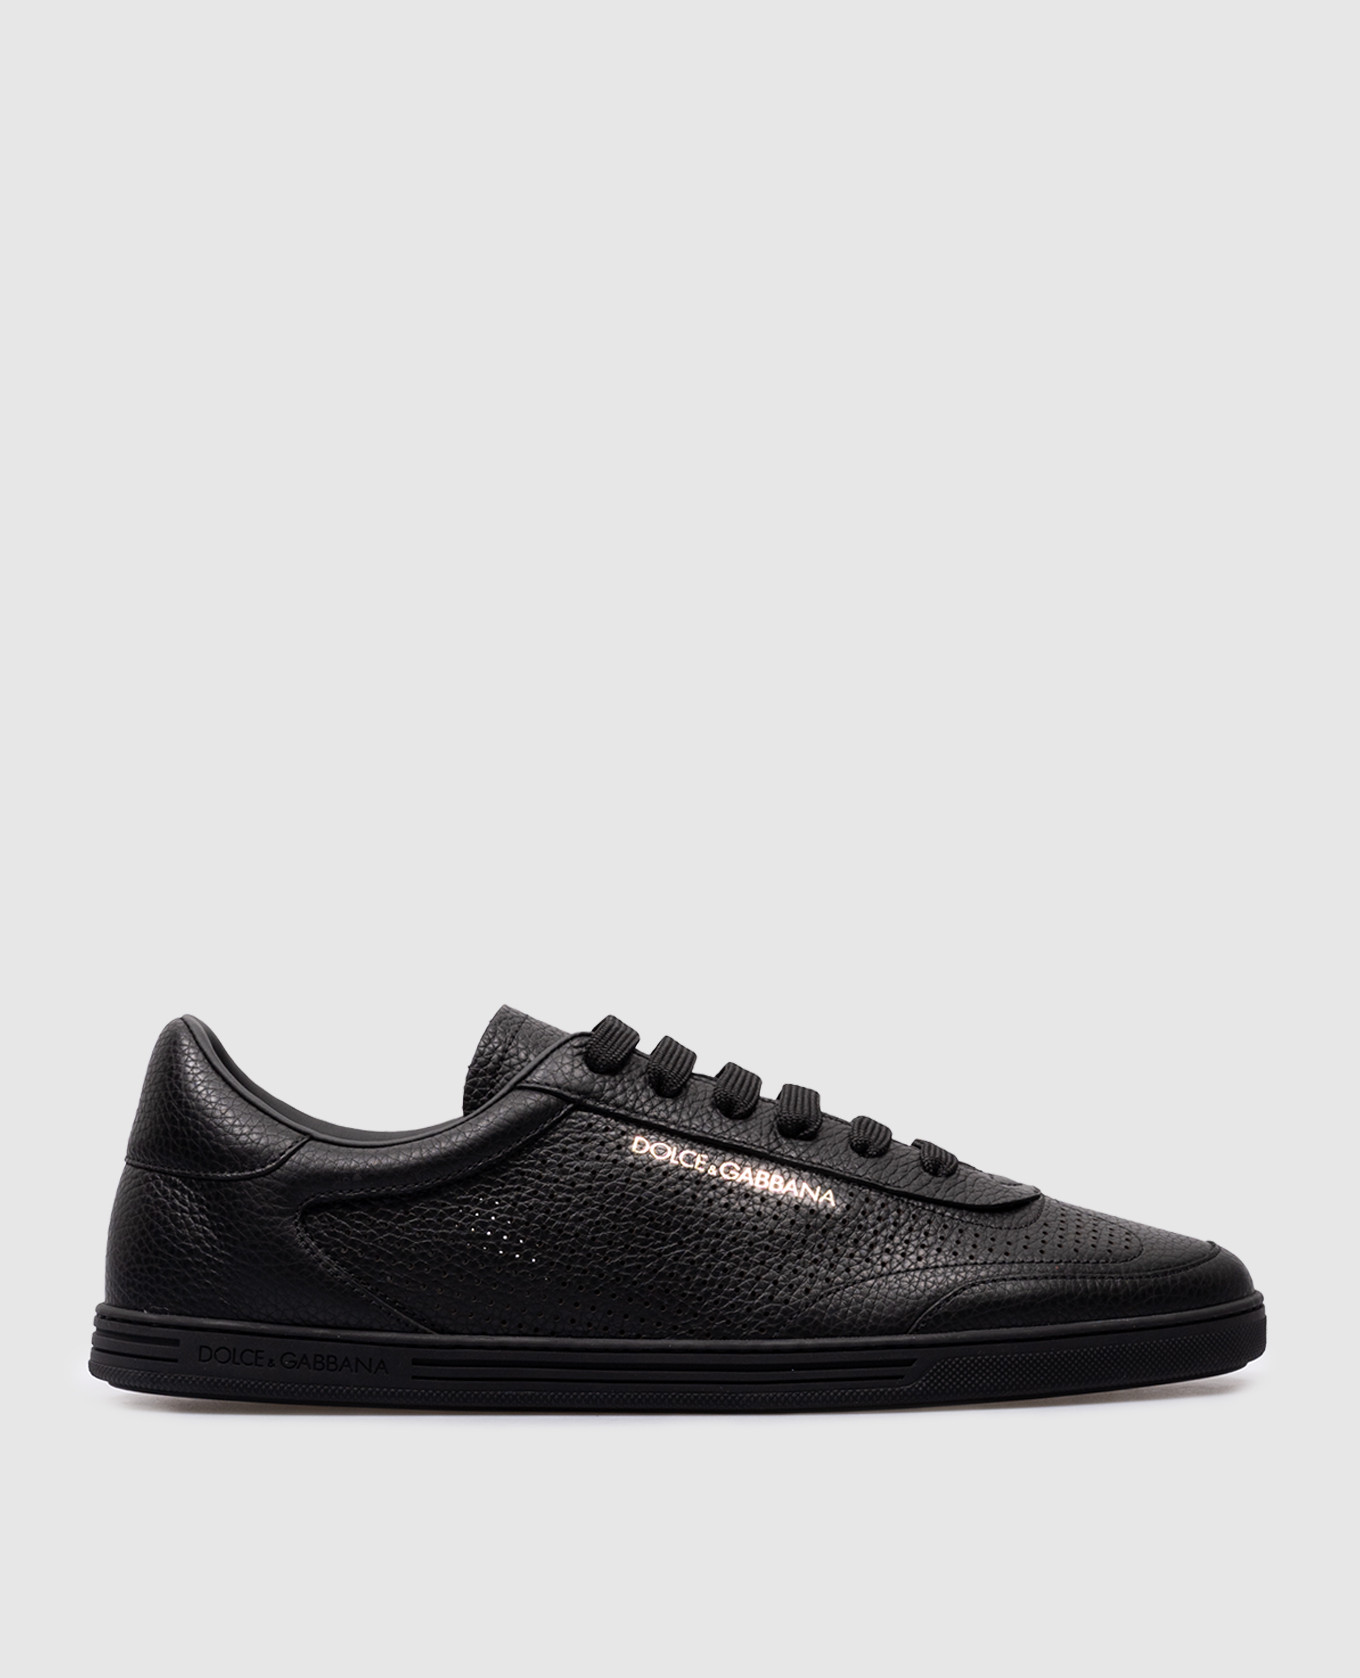 Saint Tropez black leather sneakers with logo